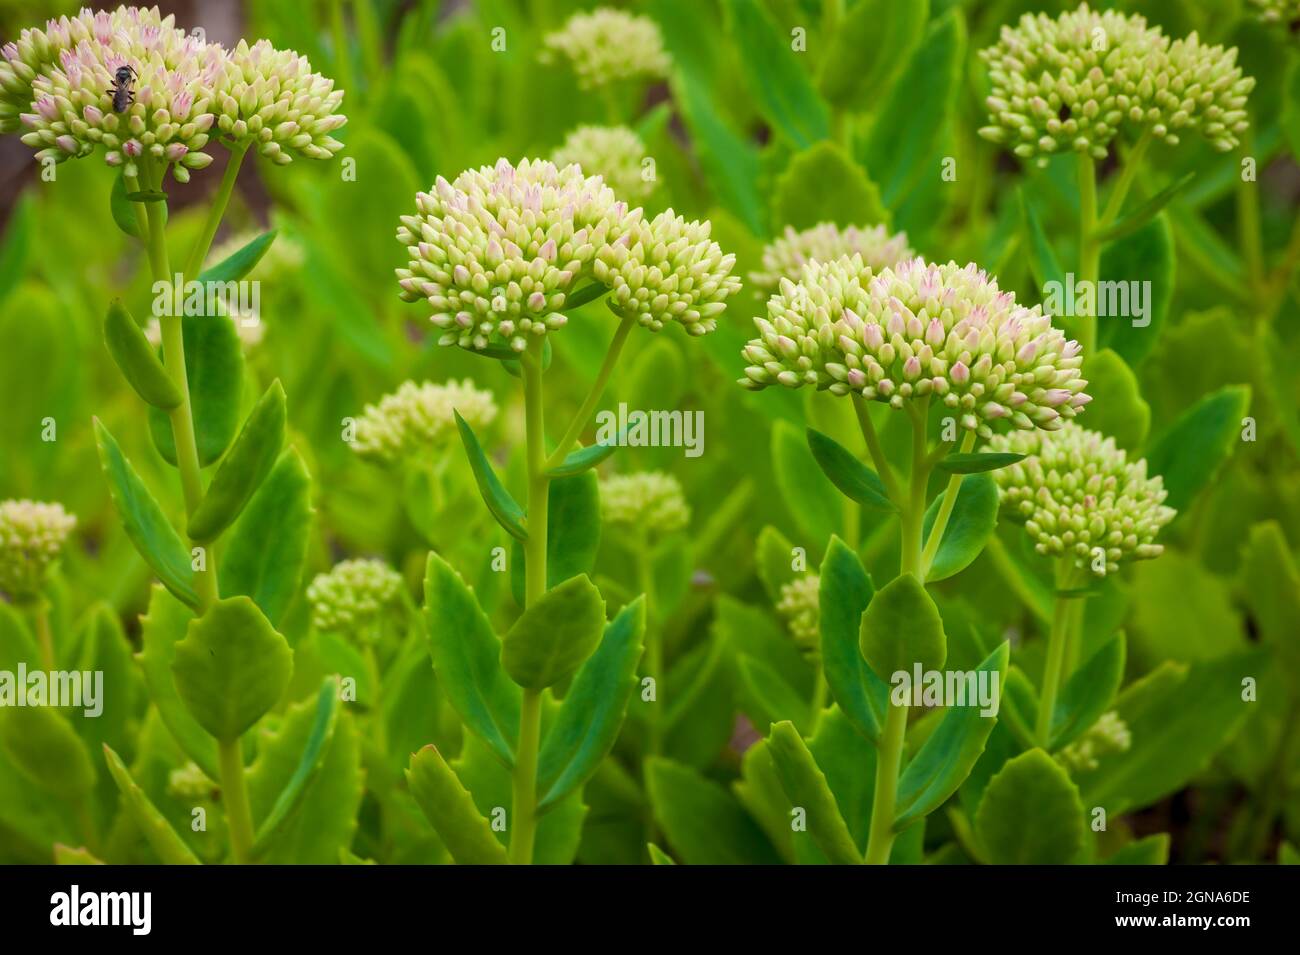 Butterfly stonecrop (Hylotelephium spectabile). Pink and cream flower buds in a cymose inflorescence. Cathedral of the Pines, Rindge, New Hampshire Stock Photo